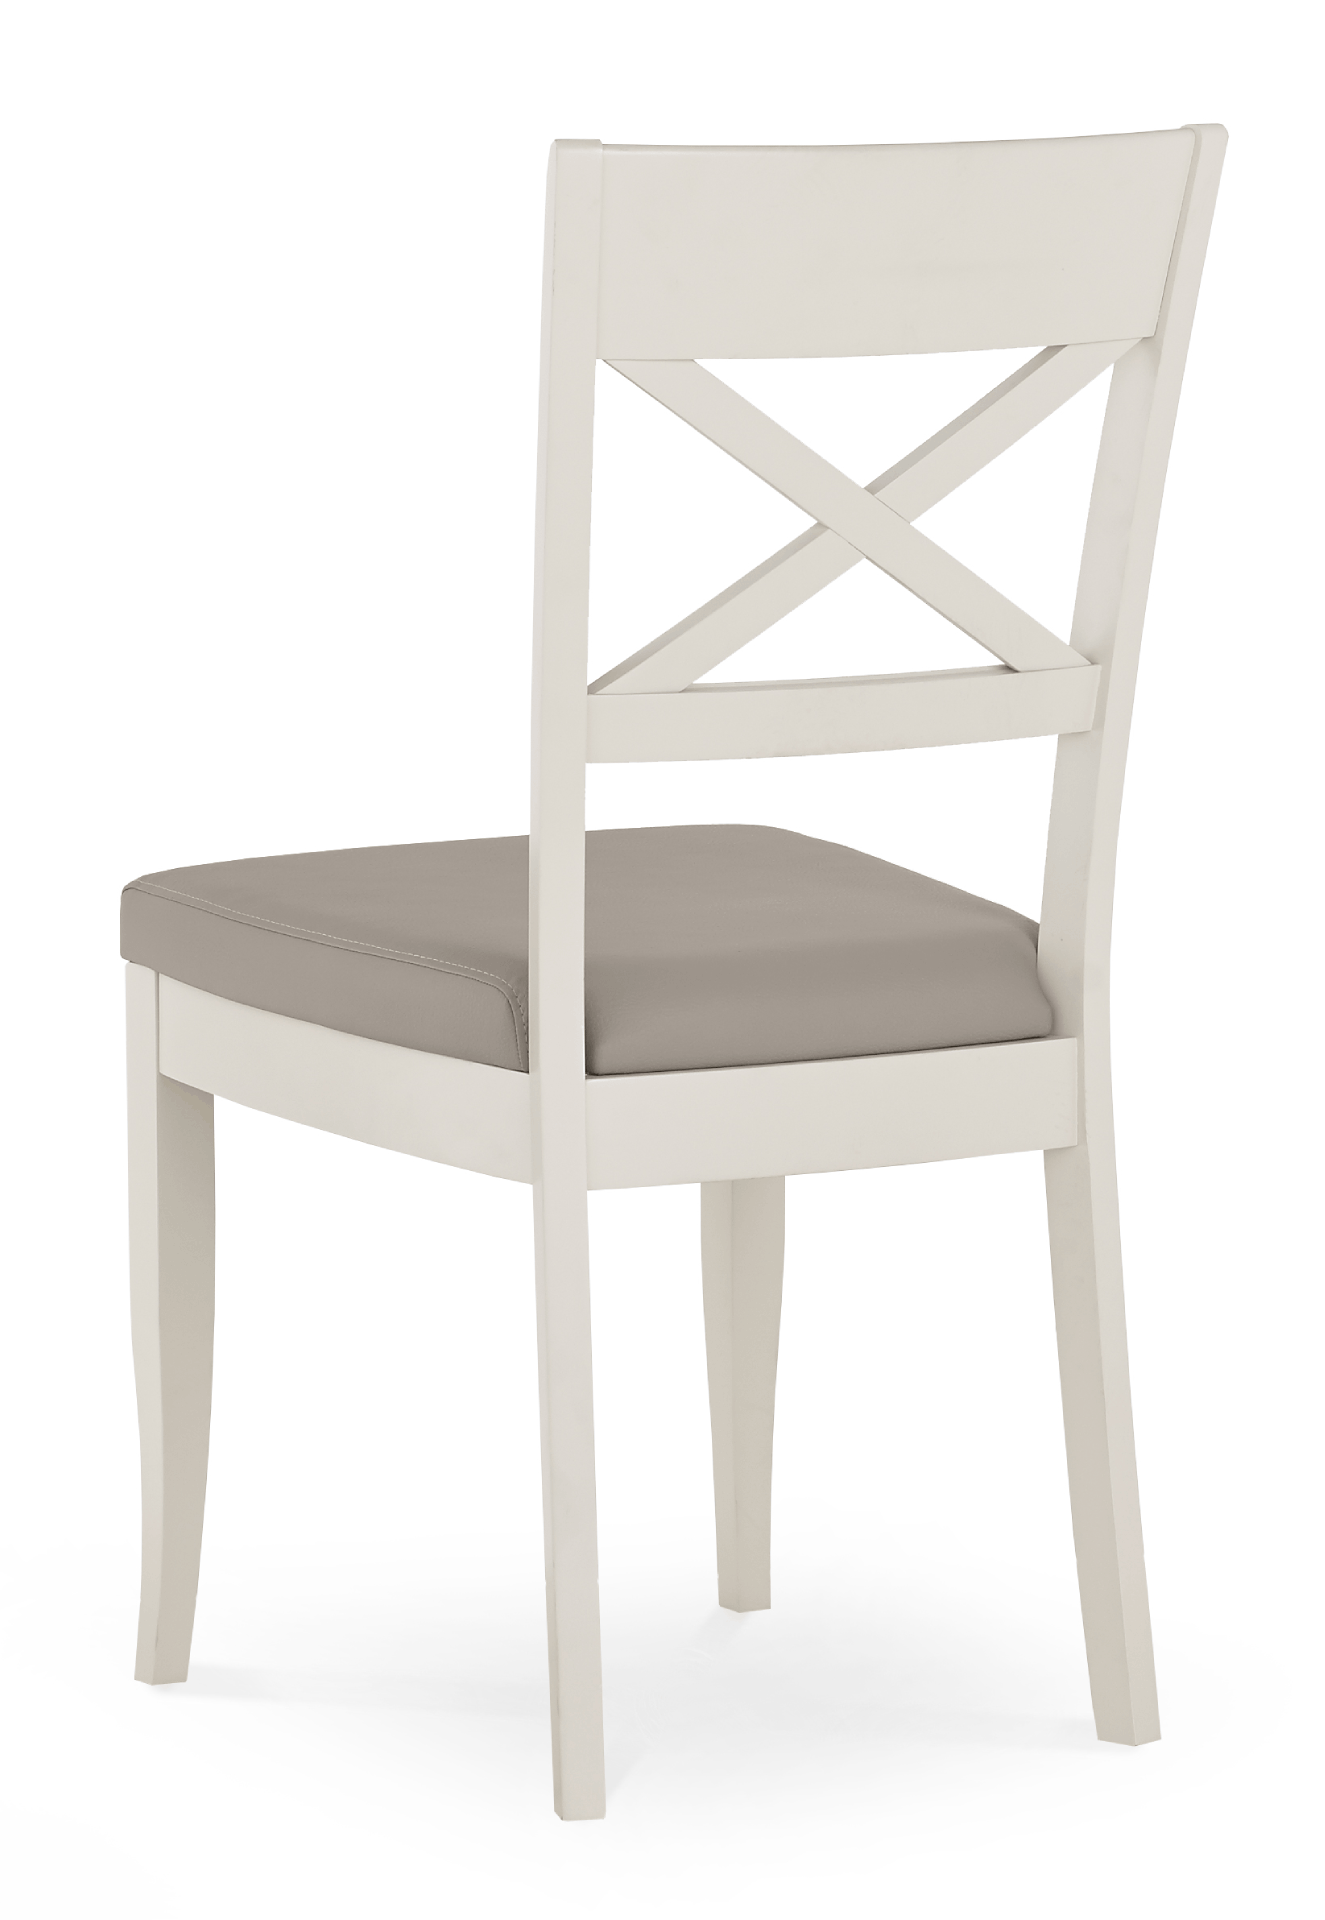 Montreux X Back Chair - Soft Grey